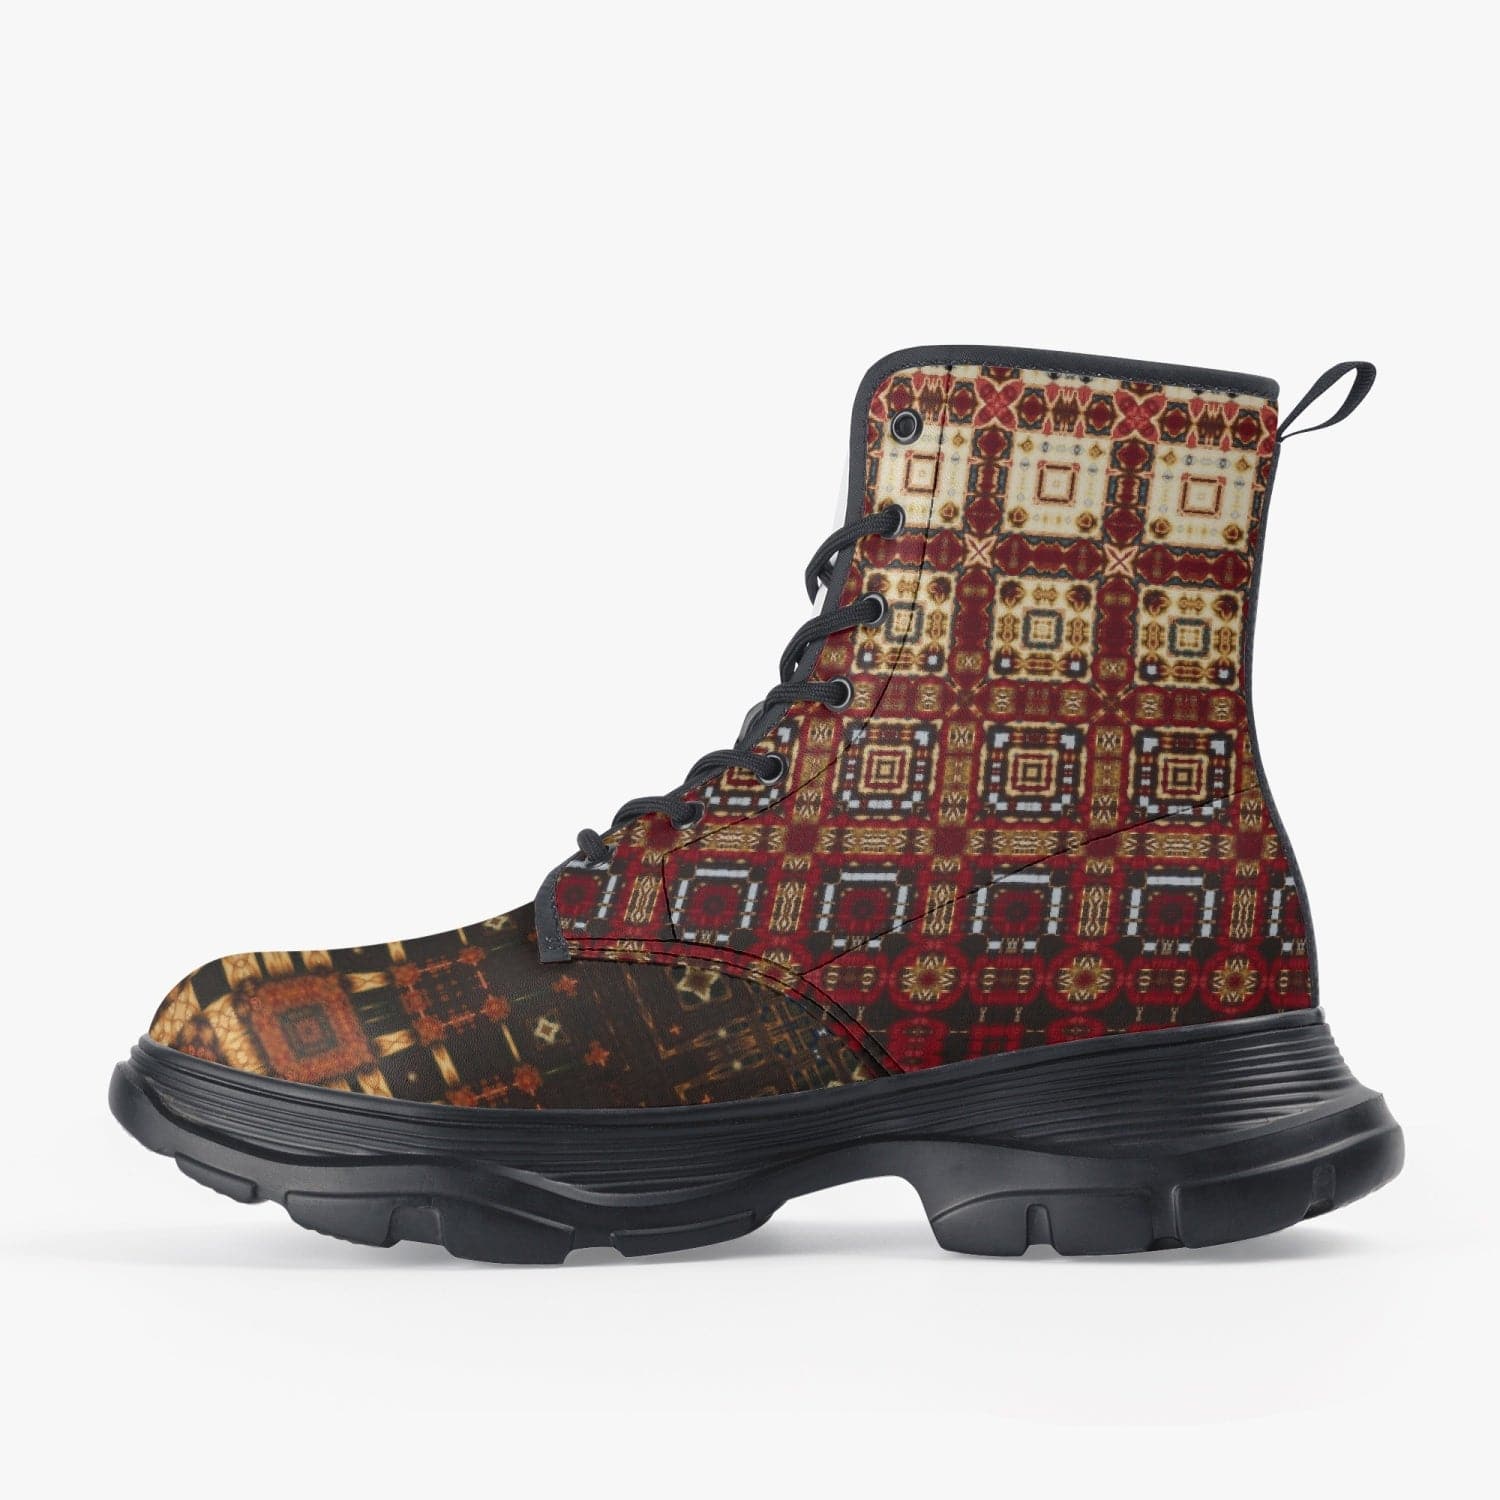 Orange and brown patterned exclusive designed Casual Leather Chunky Boots, by Sensus Studio Design